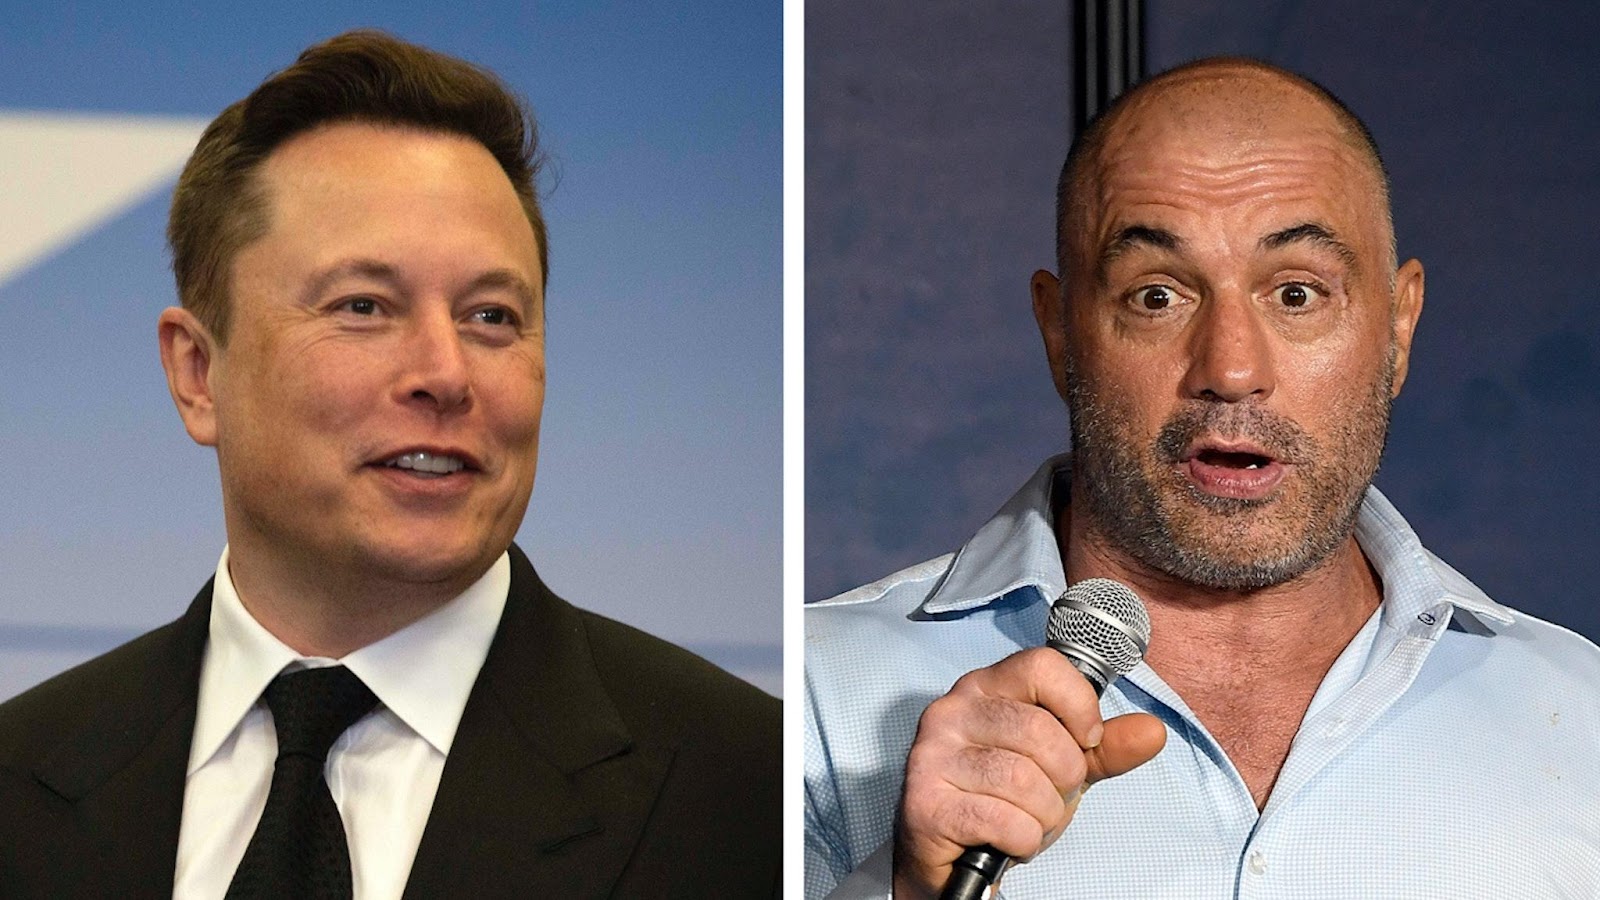 Elon Musk, founder and CEO of SpaceX, participates in a press conference at the Kennedy Space Center on May 27, 2020 in Cape Canaveral, Florida. Comedian Joe Rogan performs during his appearance at The Ice House Comedy Club on April 17, 2019 in Pasadena, California.